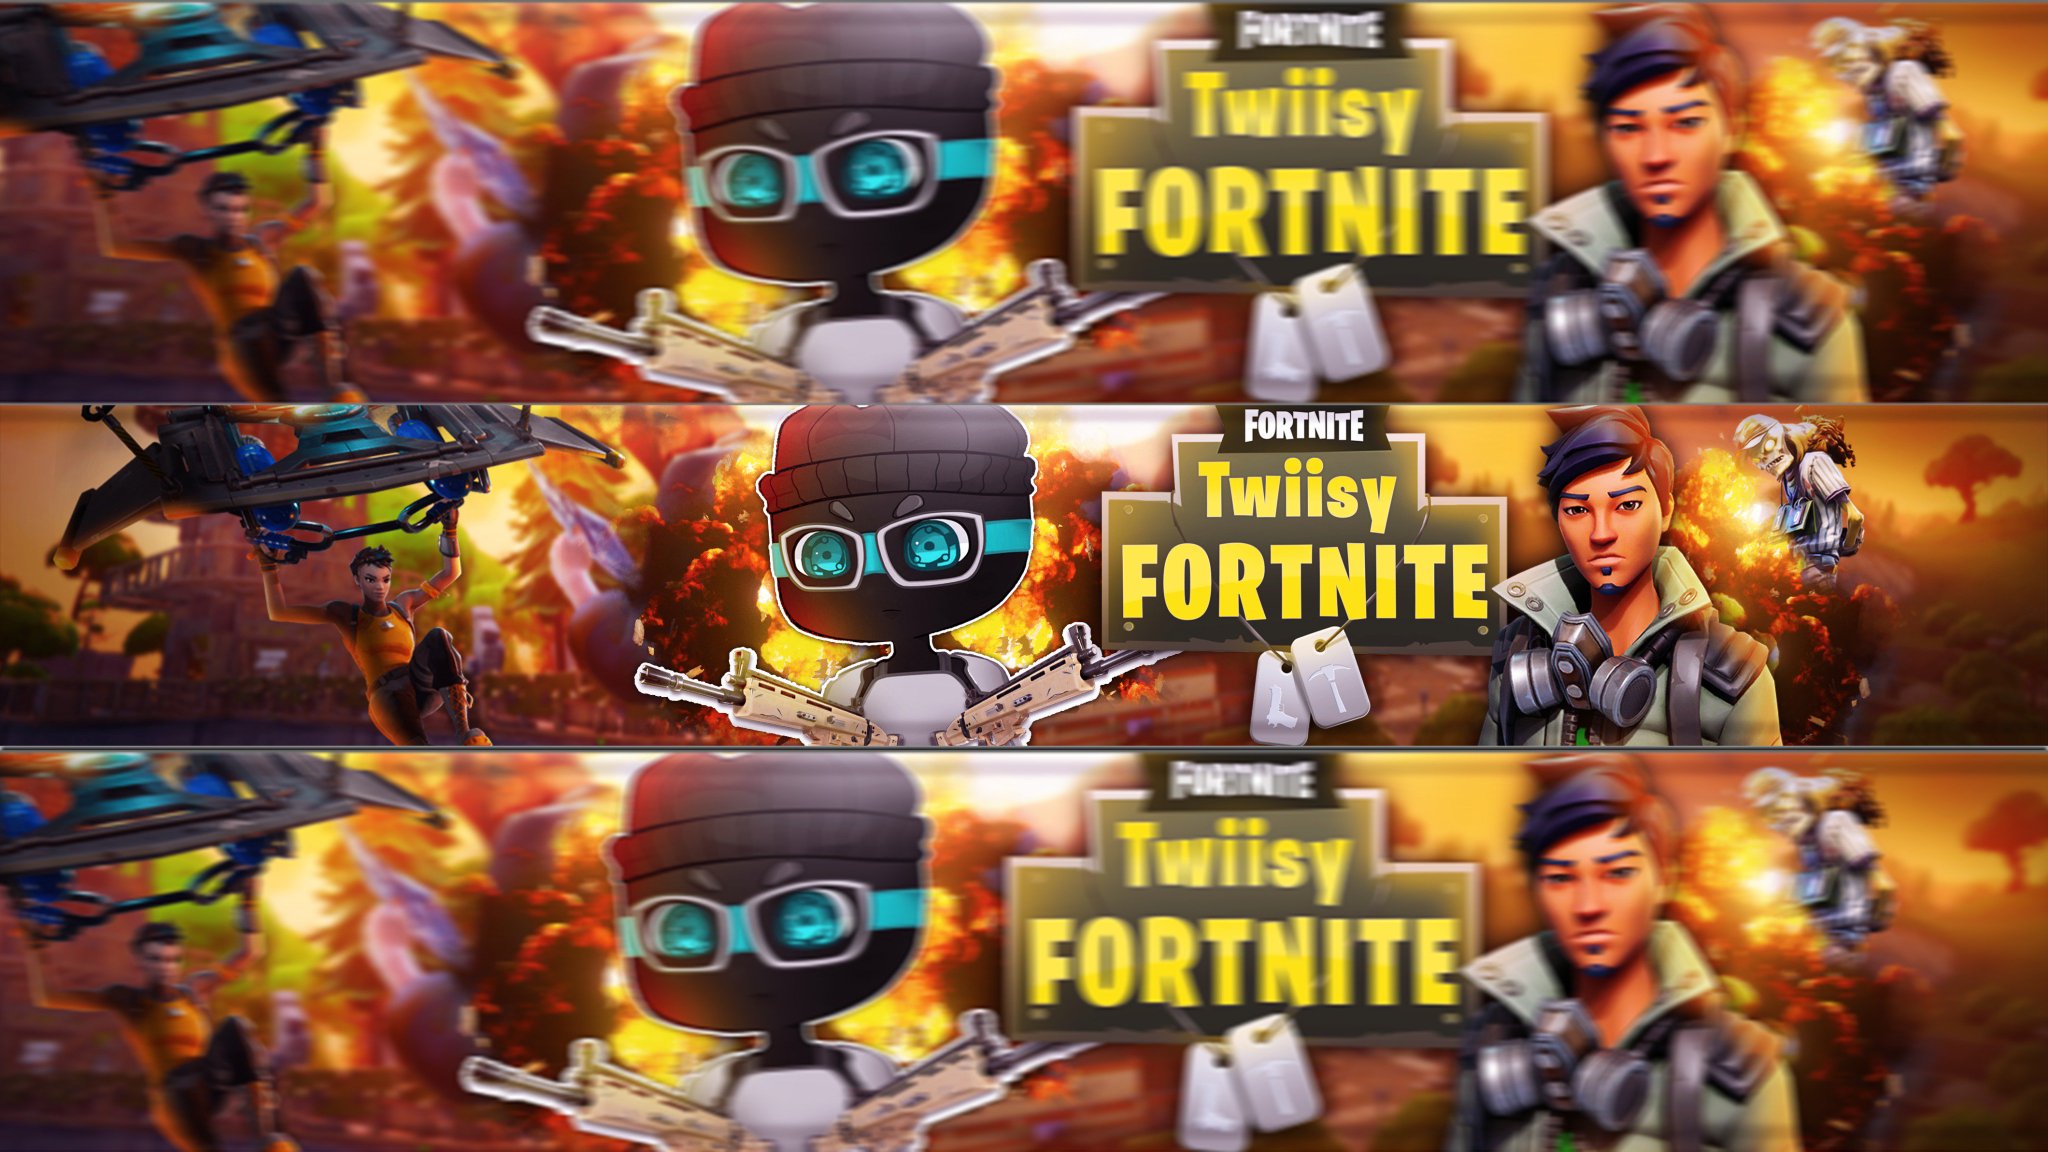 Hydra Pa Twitter Banner Twiisyout Opinions Hd Https T Co Pd3nldfsyj Rt Like Si Tu Aimes Max De Rt C Est Ma Premiere Banniere Fortnite Iswiqz Zygpx Https T Co Rahevbs3fk